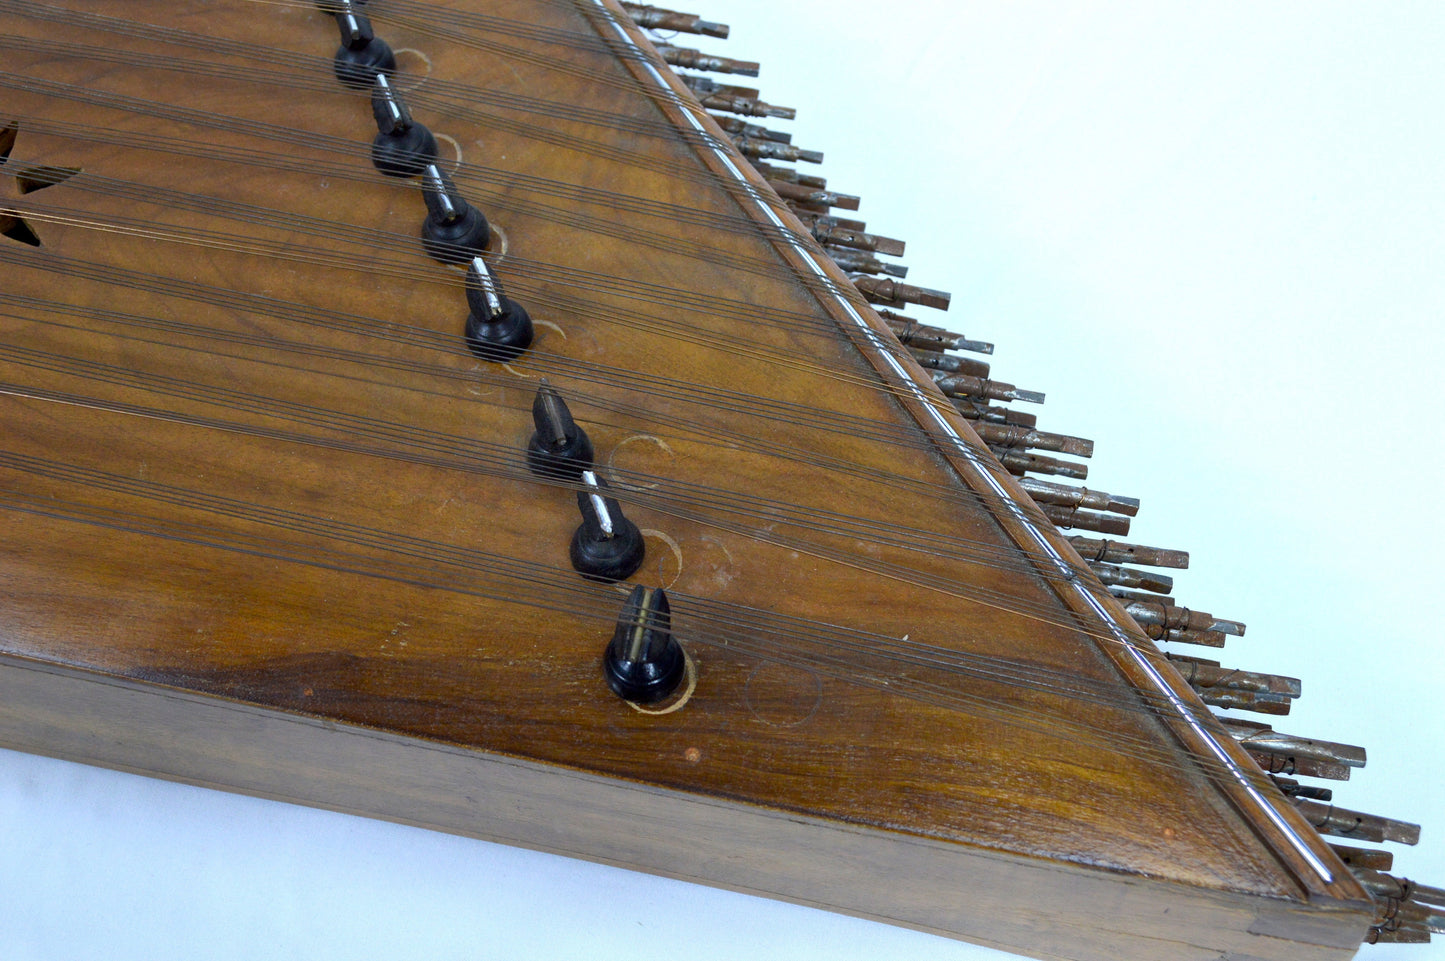 Persian Santoor Plucked Strings - Others Lark in the Morning   